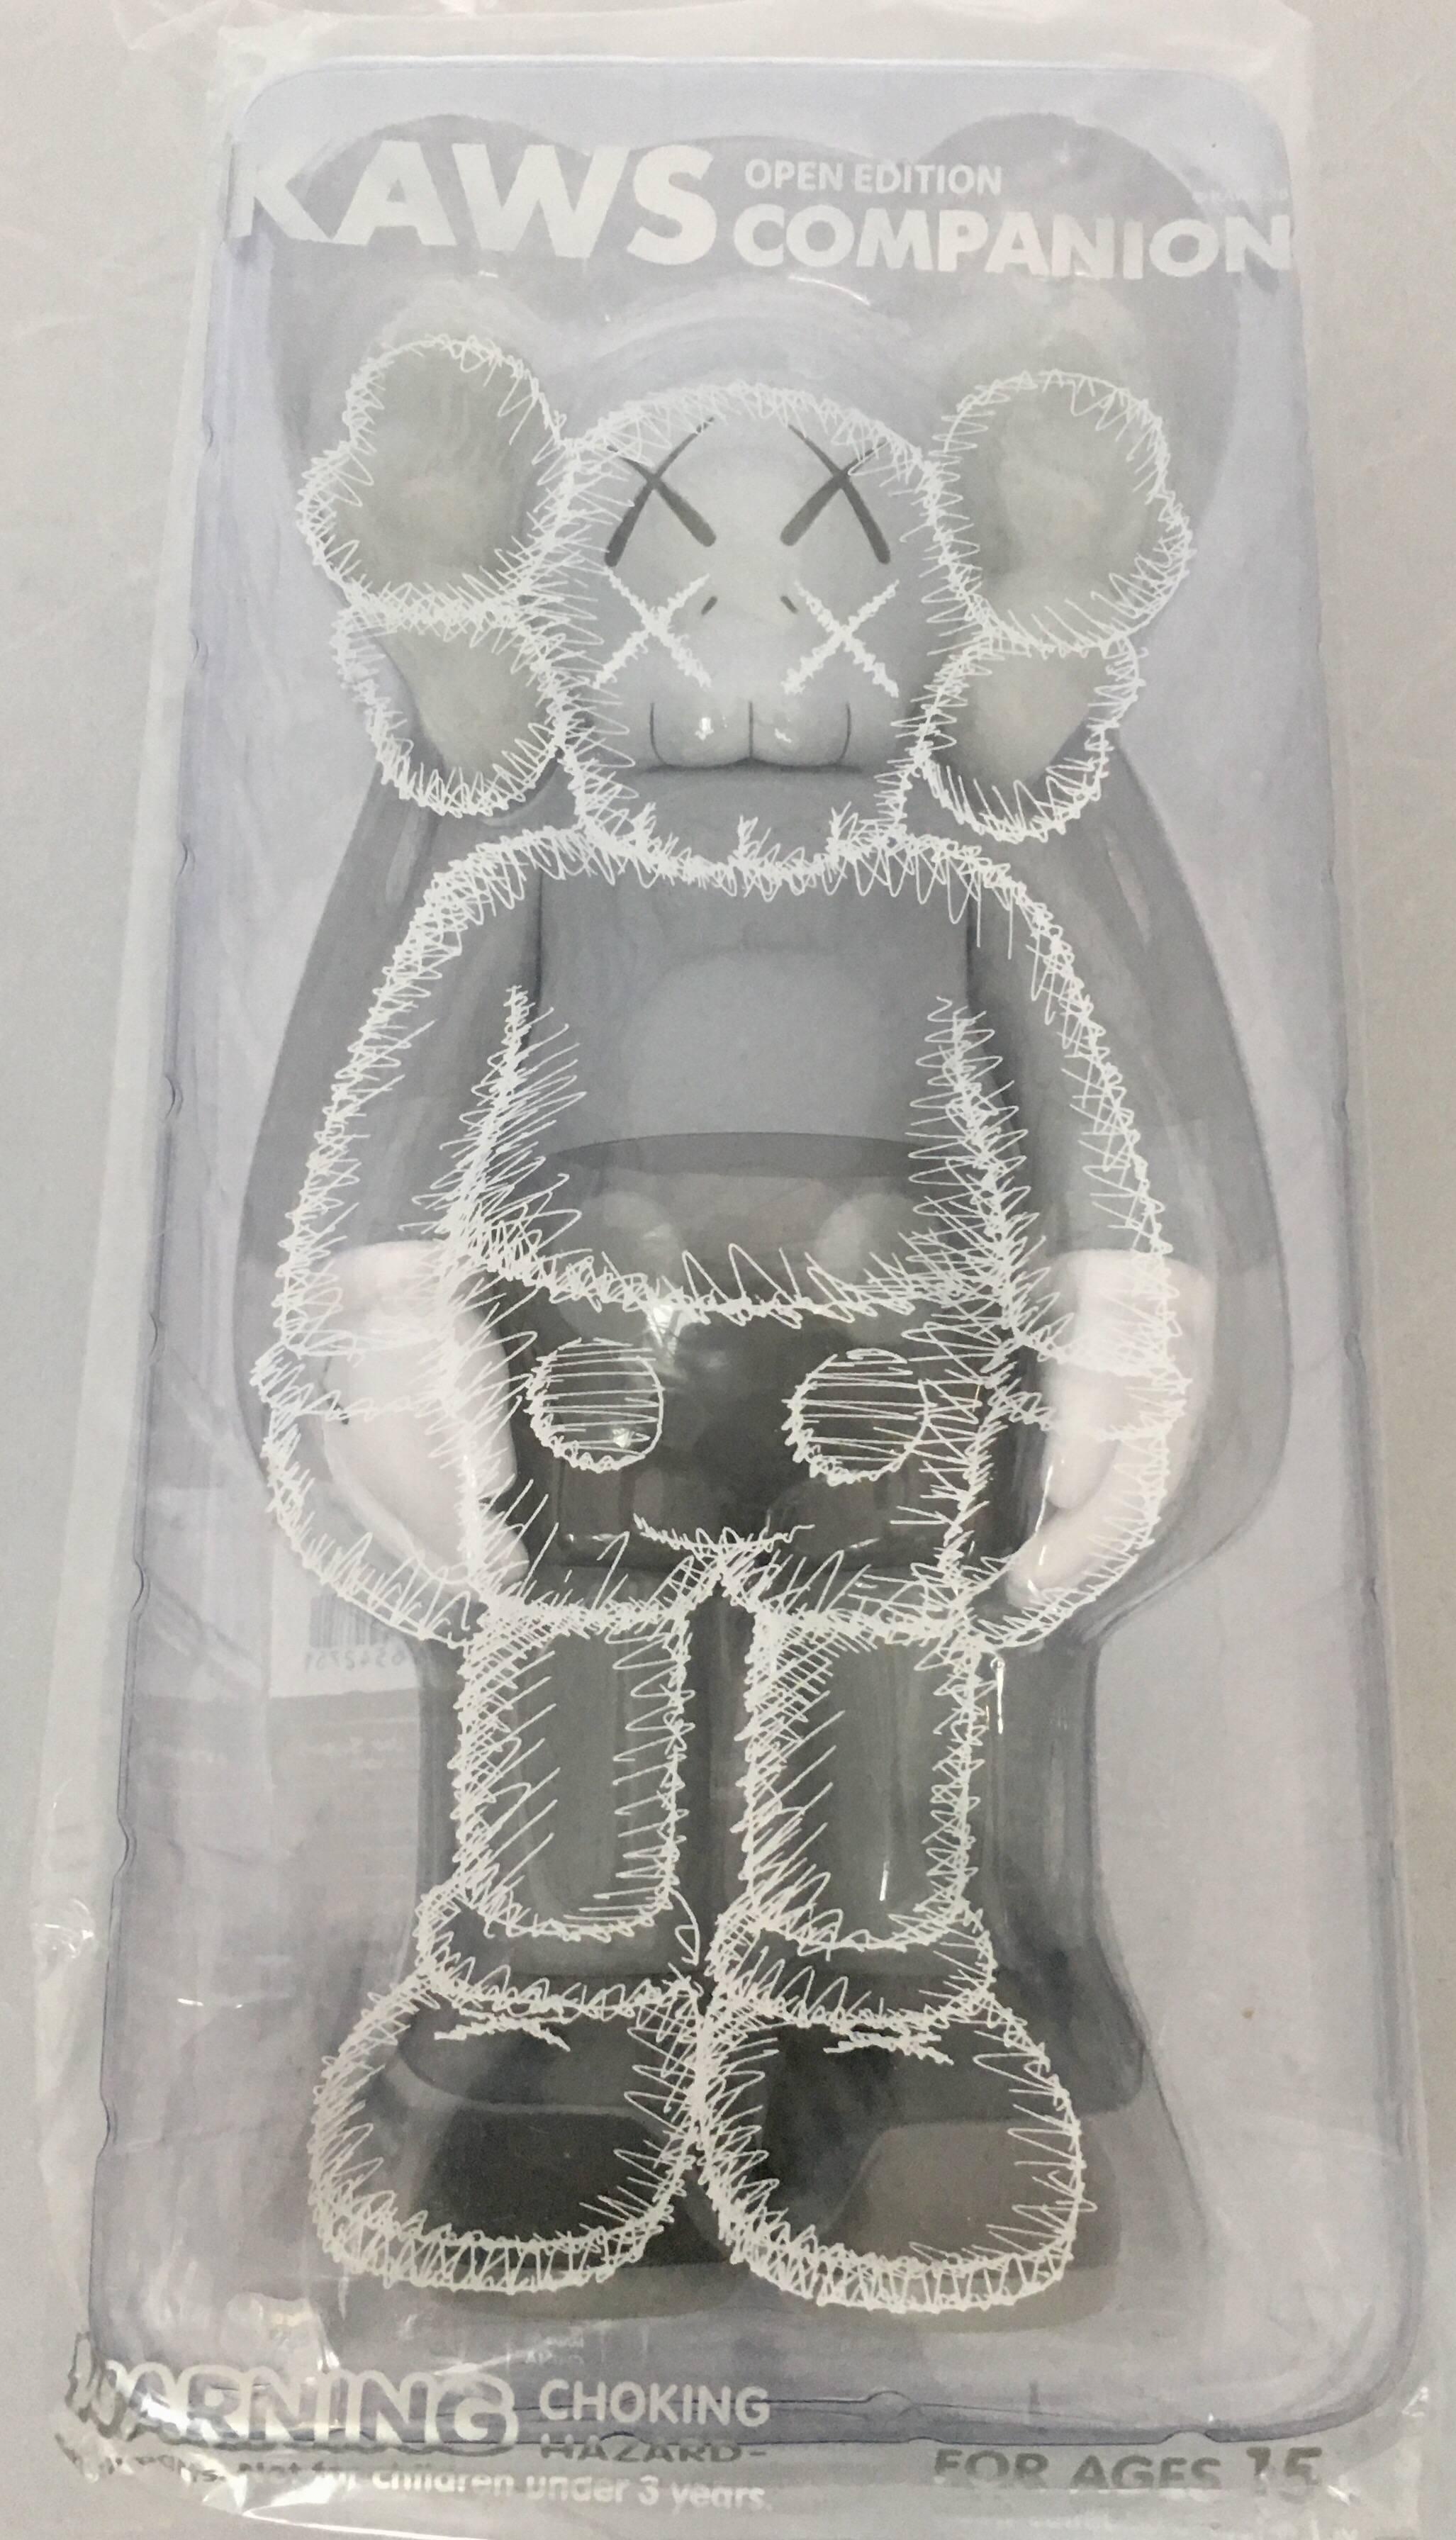 KAWS Companion 2016: Set of 3 works new and sealed in original packaging. Published by Medicom Japan in conjunction with the exhibition, KAWS: Where The End Starts at the Modern Art Museum of Fort Worth. Set includes 3 colors: Black, Brown and